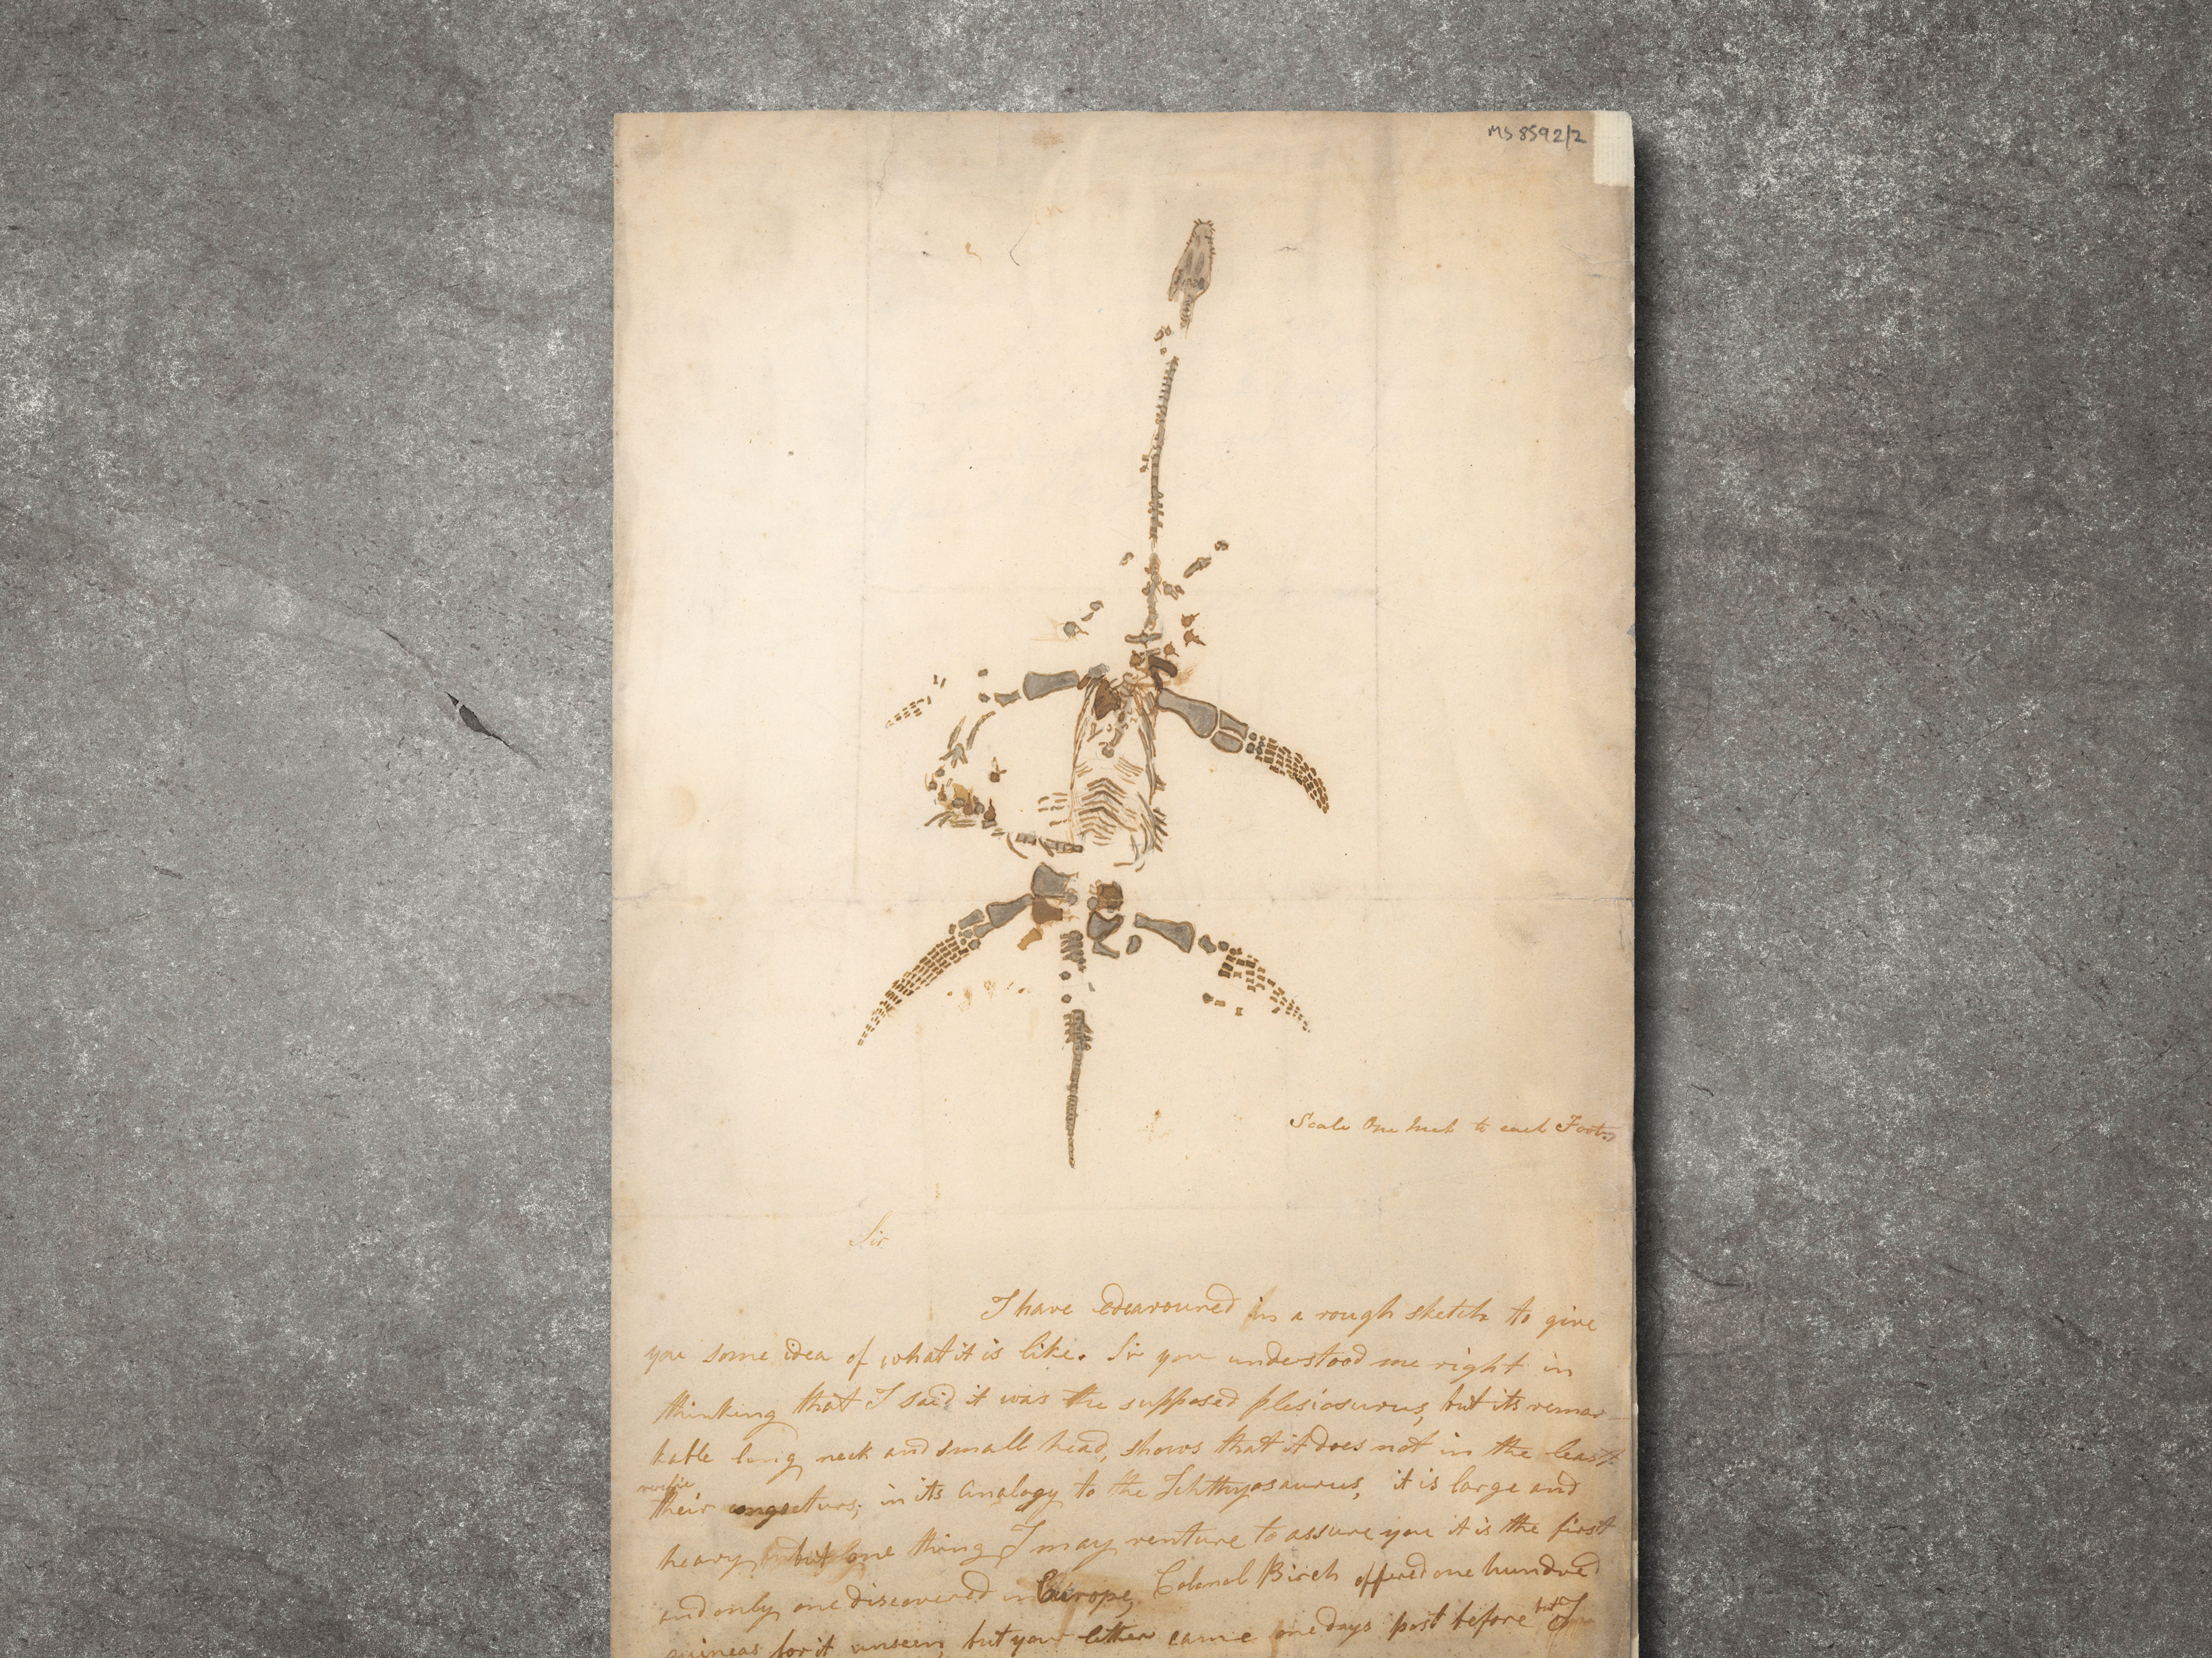 A photograph of a 19th century handwritten document on a concrete background. The document has a large sketch of the bone structure of a plesiosaurus dinosaur, signed by Mary Anning. The skeleton has four limbs made up of numerous bones and a long neck which is surrounded by other pieces of bone.